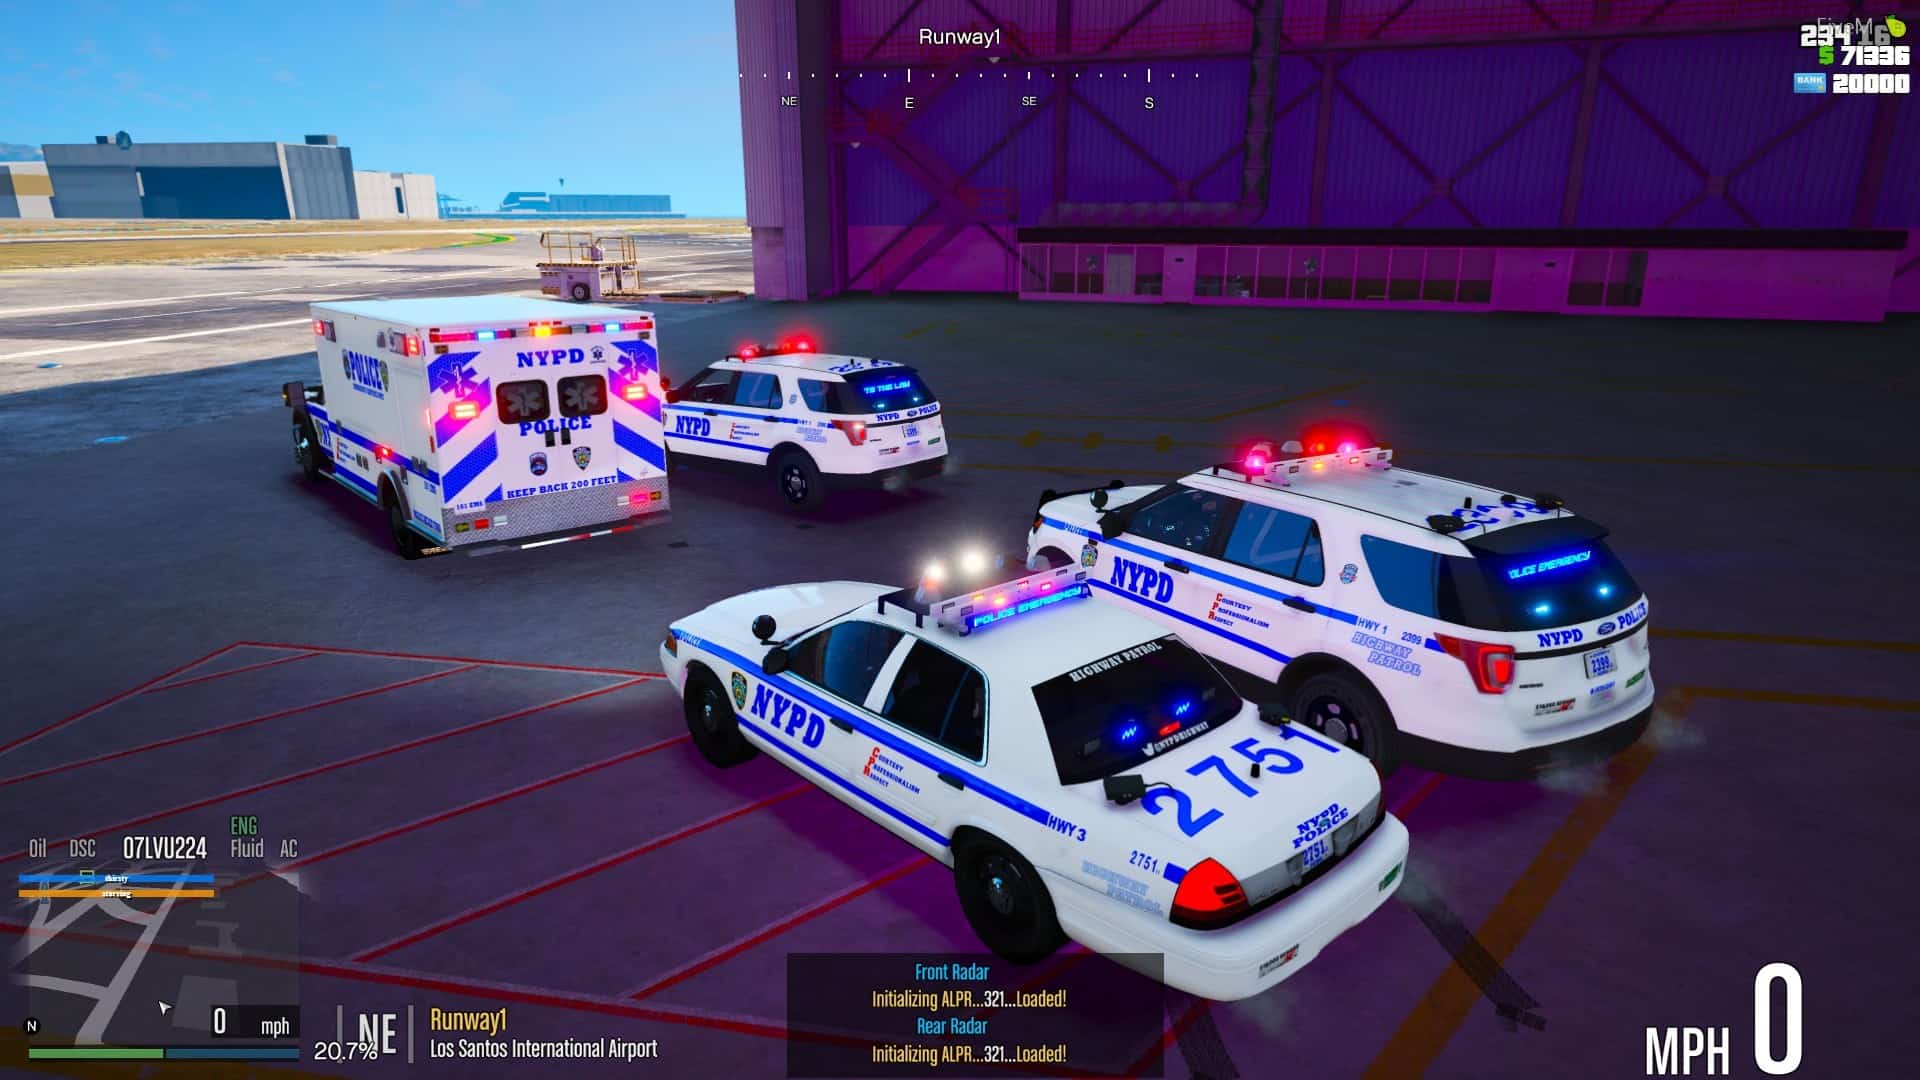 Nypd Vehicles Pack [add On Fivem] 4 2 B Nypd Pack Add On 5m Gta 5